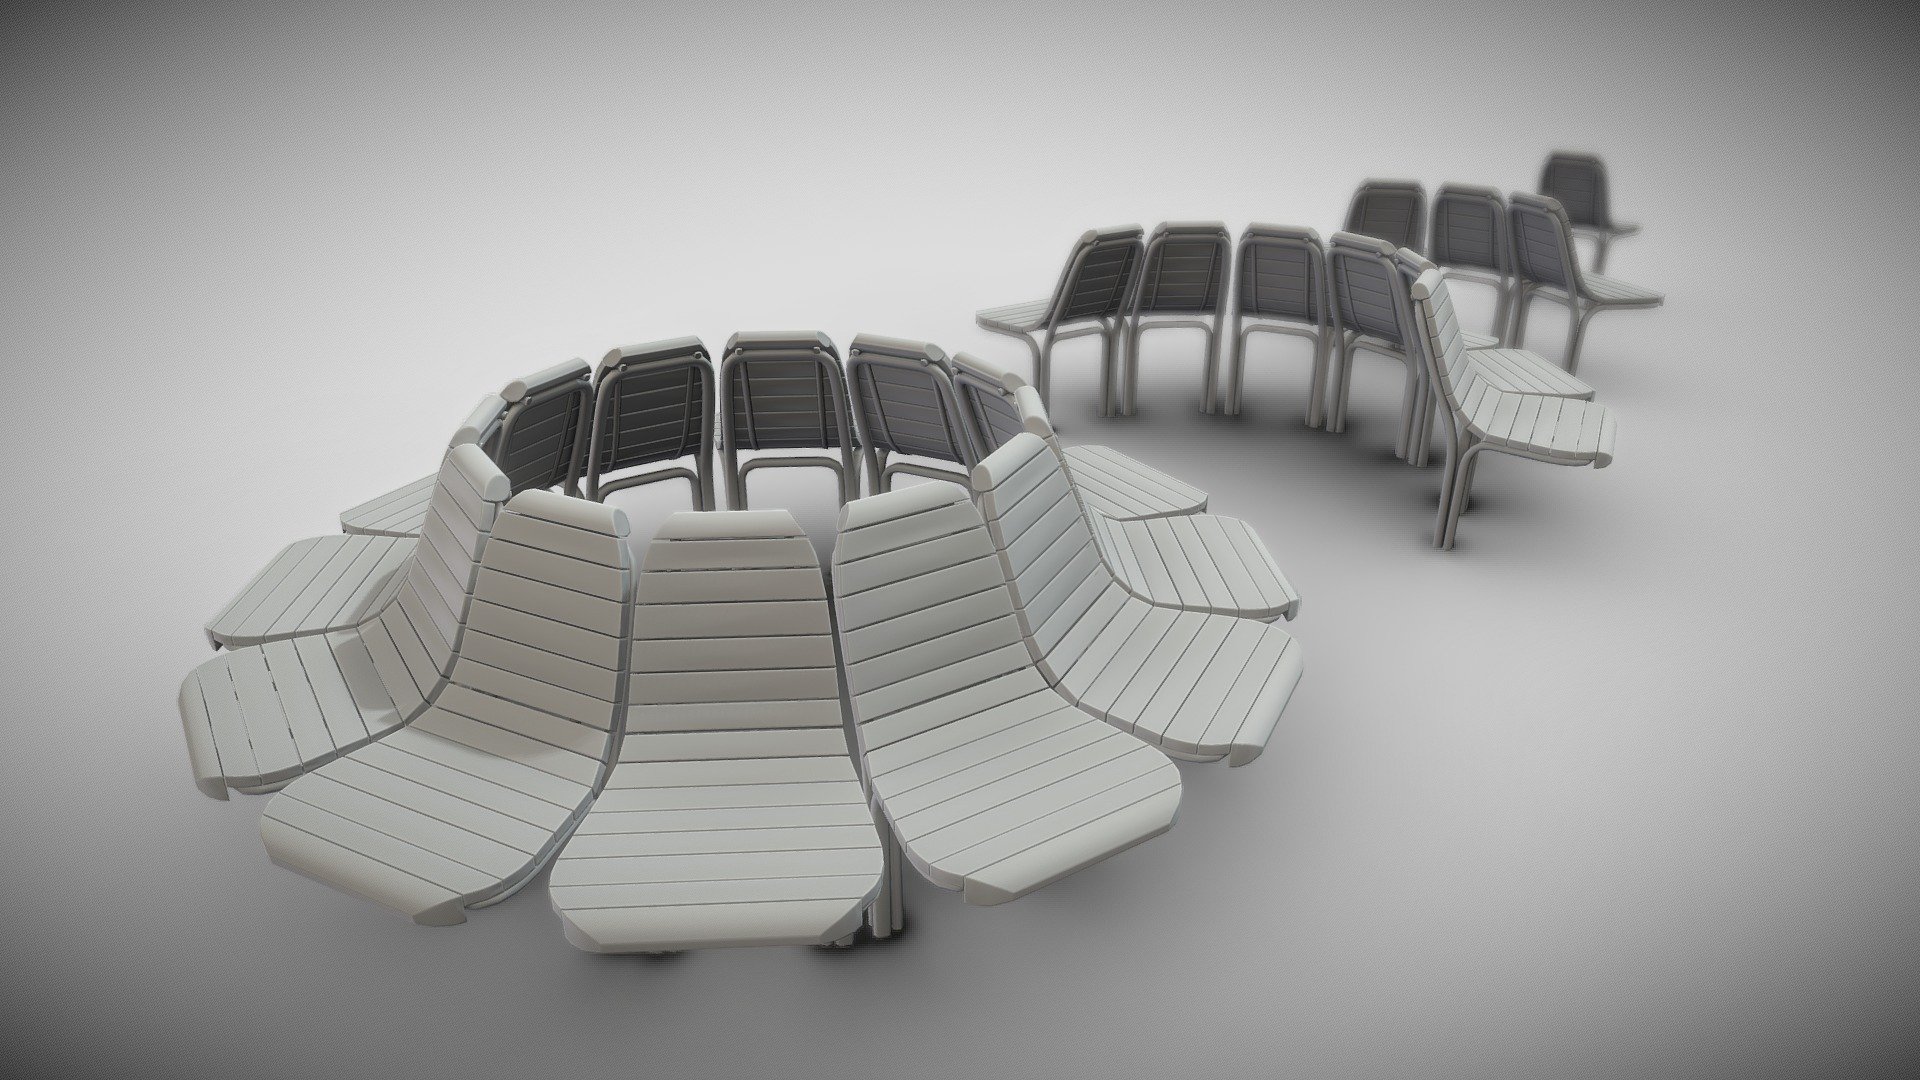 The basic version of the Round Bench.
Bench [7] with 4 parts




Round Bench [7] 4 parts Wood Metal Version 1

Round Bench [7] 4 parts
 Aluminum Version 1

&ndash;

Texture maps: 




Ao, Nor, Cav 4096 x 4096 



Modeled and textured by 3DHaupt in Blender-2.82 - Round Bench [7] 4 Parts Basic Version - Buy Royalty Free 3D model by VIS-All-3D (@VIS-All) 3d model